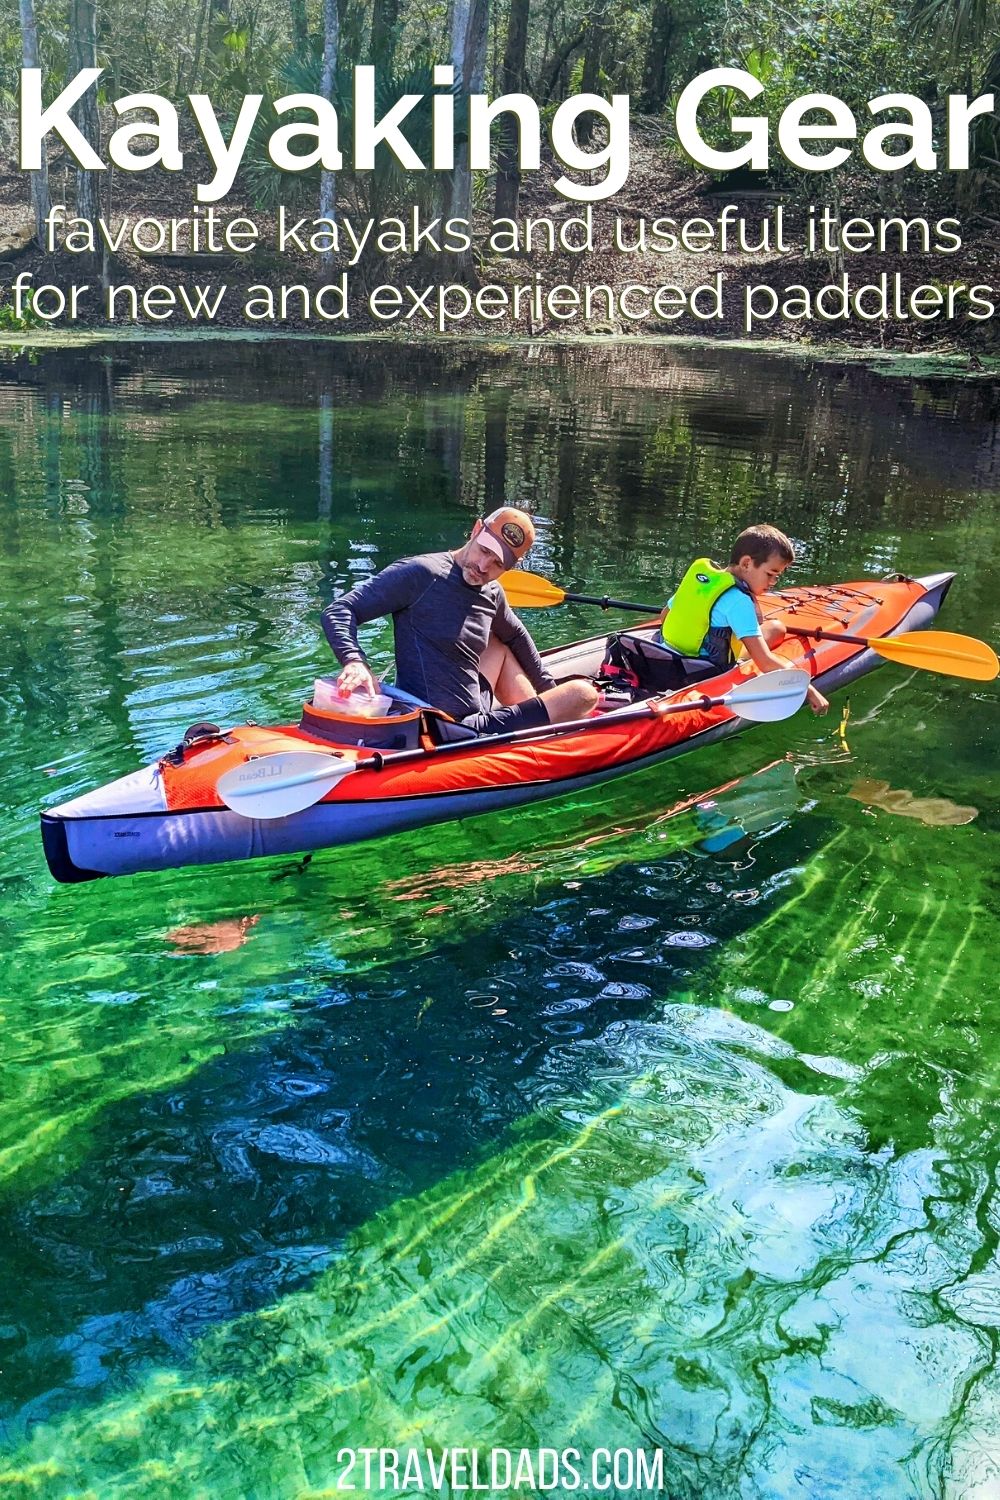 Top kayaking gear recommendations for new or experienced paddlers, from single kayaks to inflatables. Top picks for tandem kayaks and how to transport paddling gear.